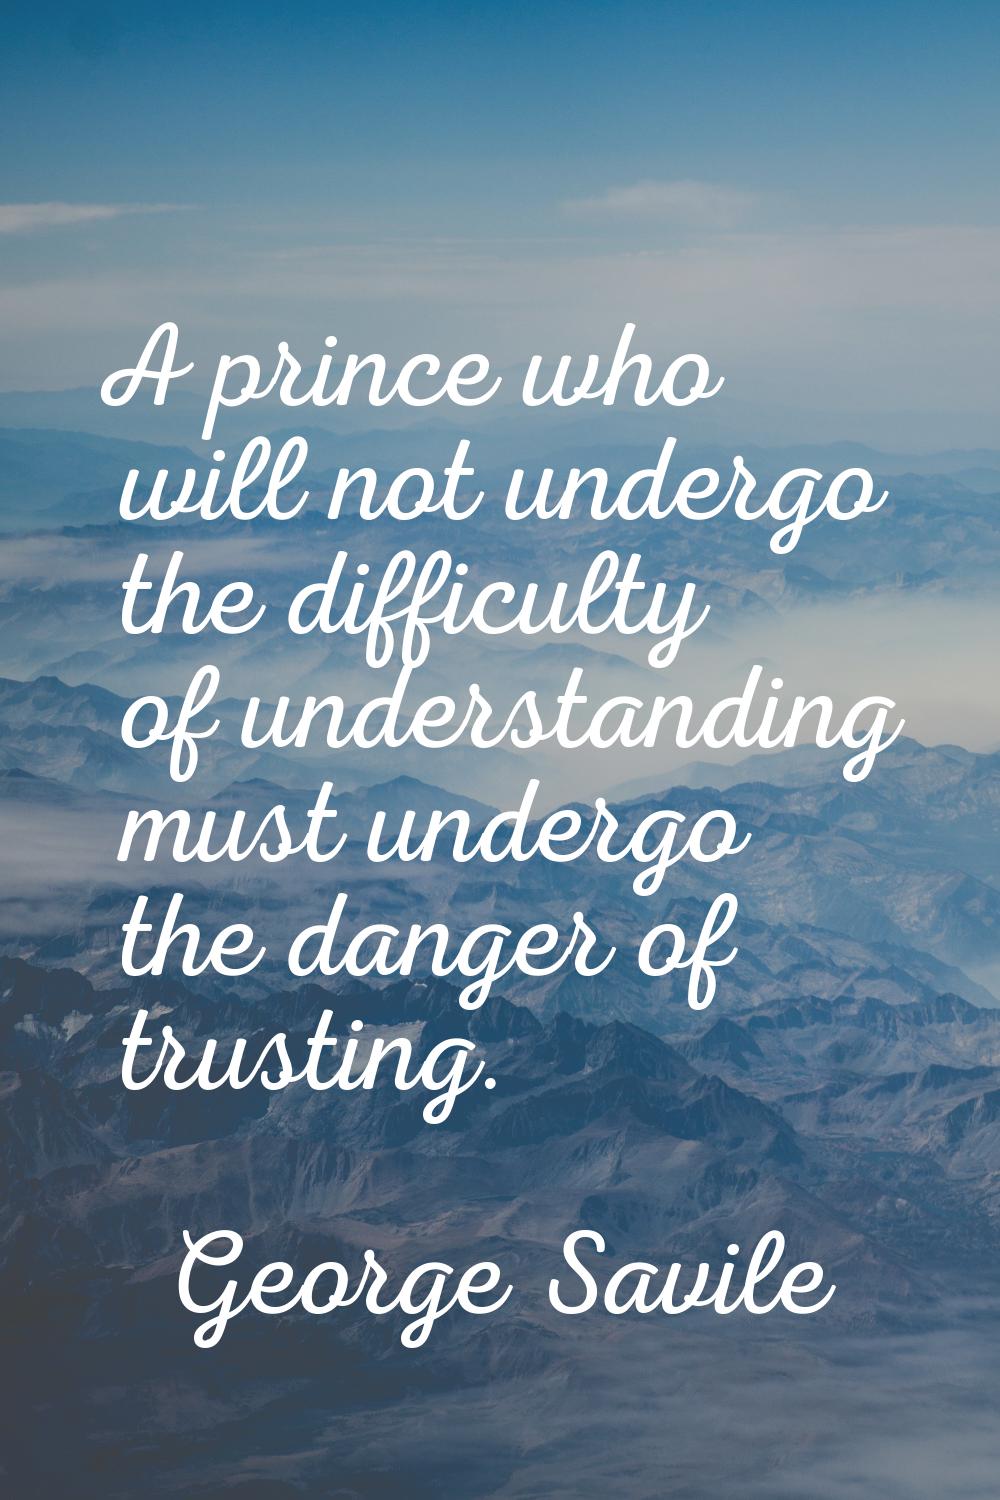 A prince who will not undergo the difficulty of understanding must undergo the danger of trusting.